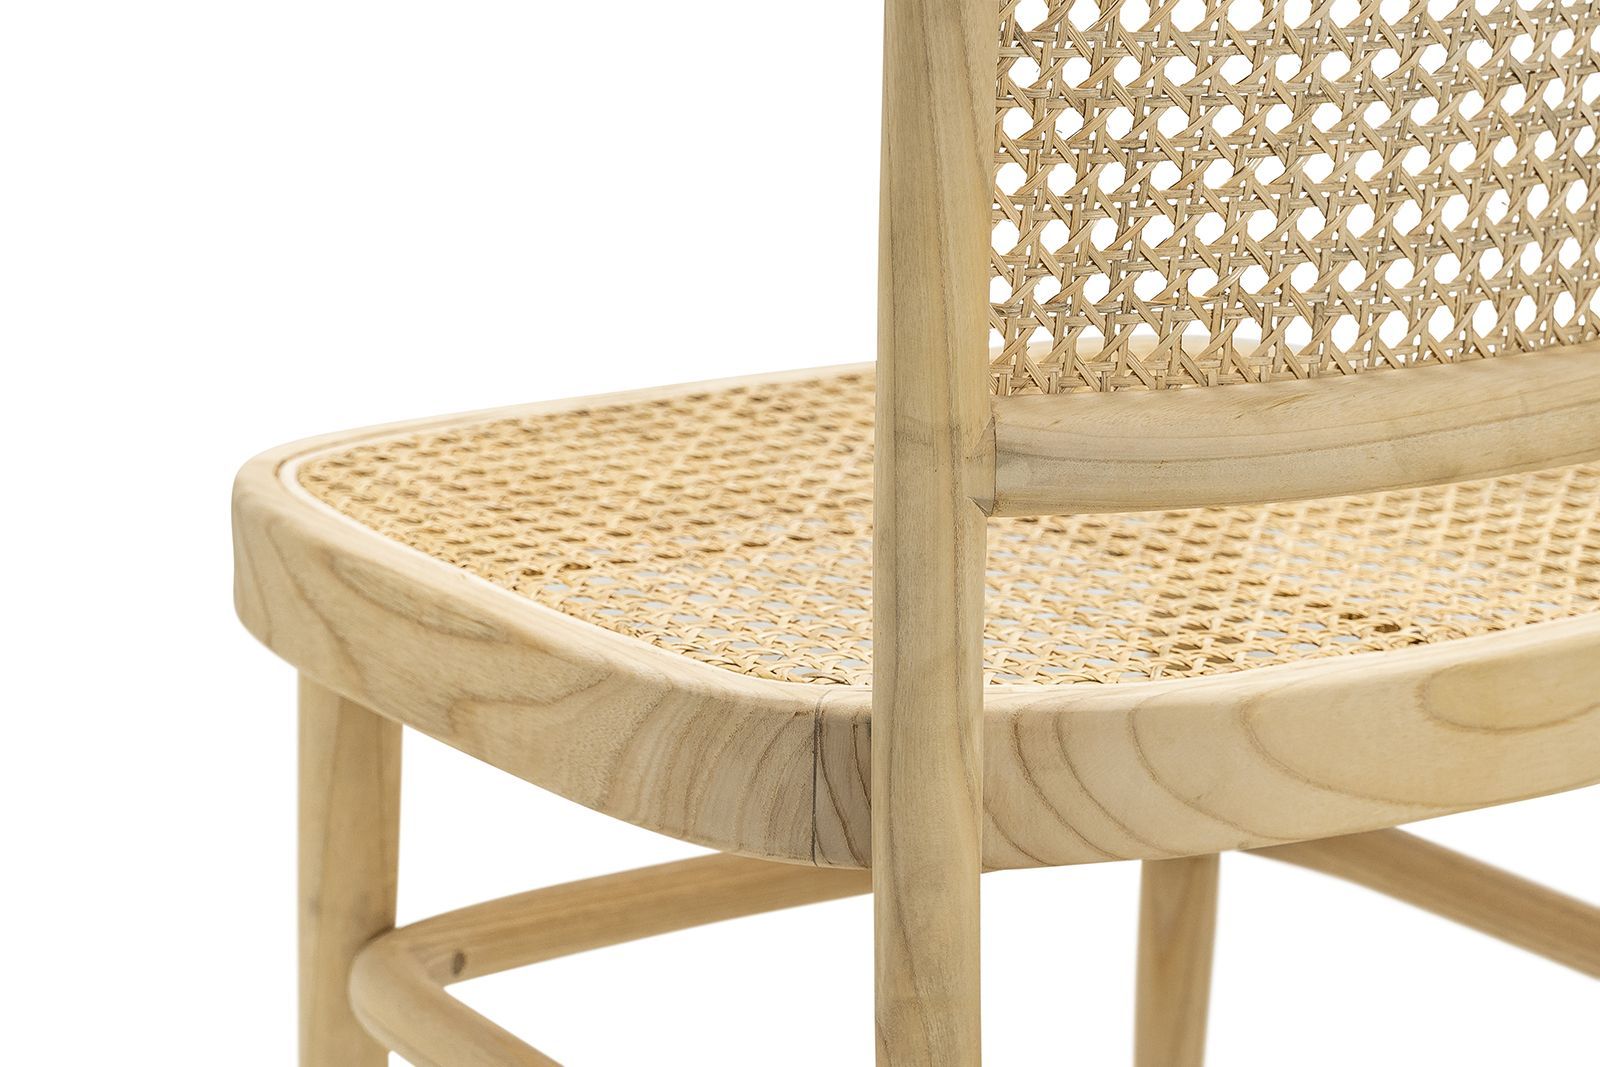 Set of 2 Amara Teak Wood Cane Dining Chair - Natural - Dining Chairs